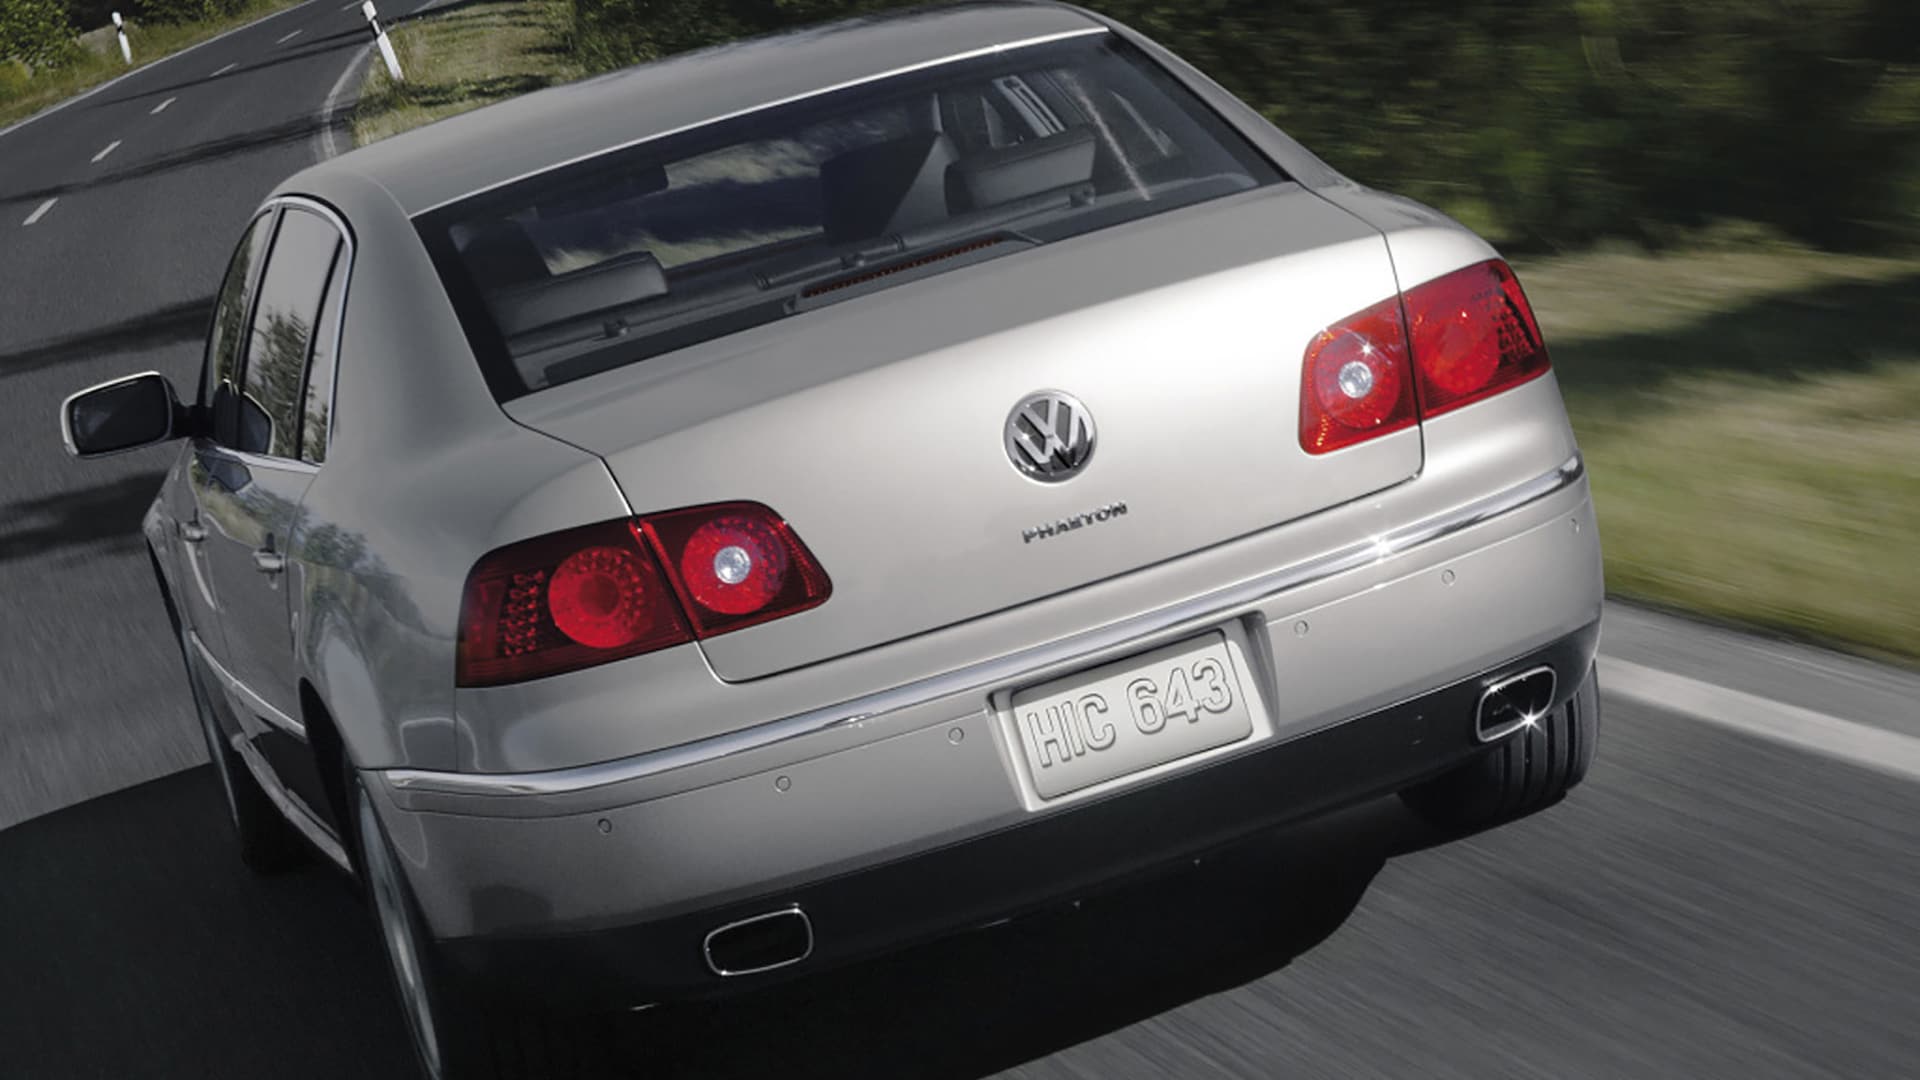 A Brief History of the Volkswagen Phaeton, the Rich People's Car